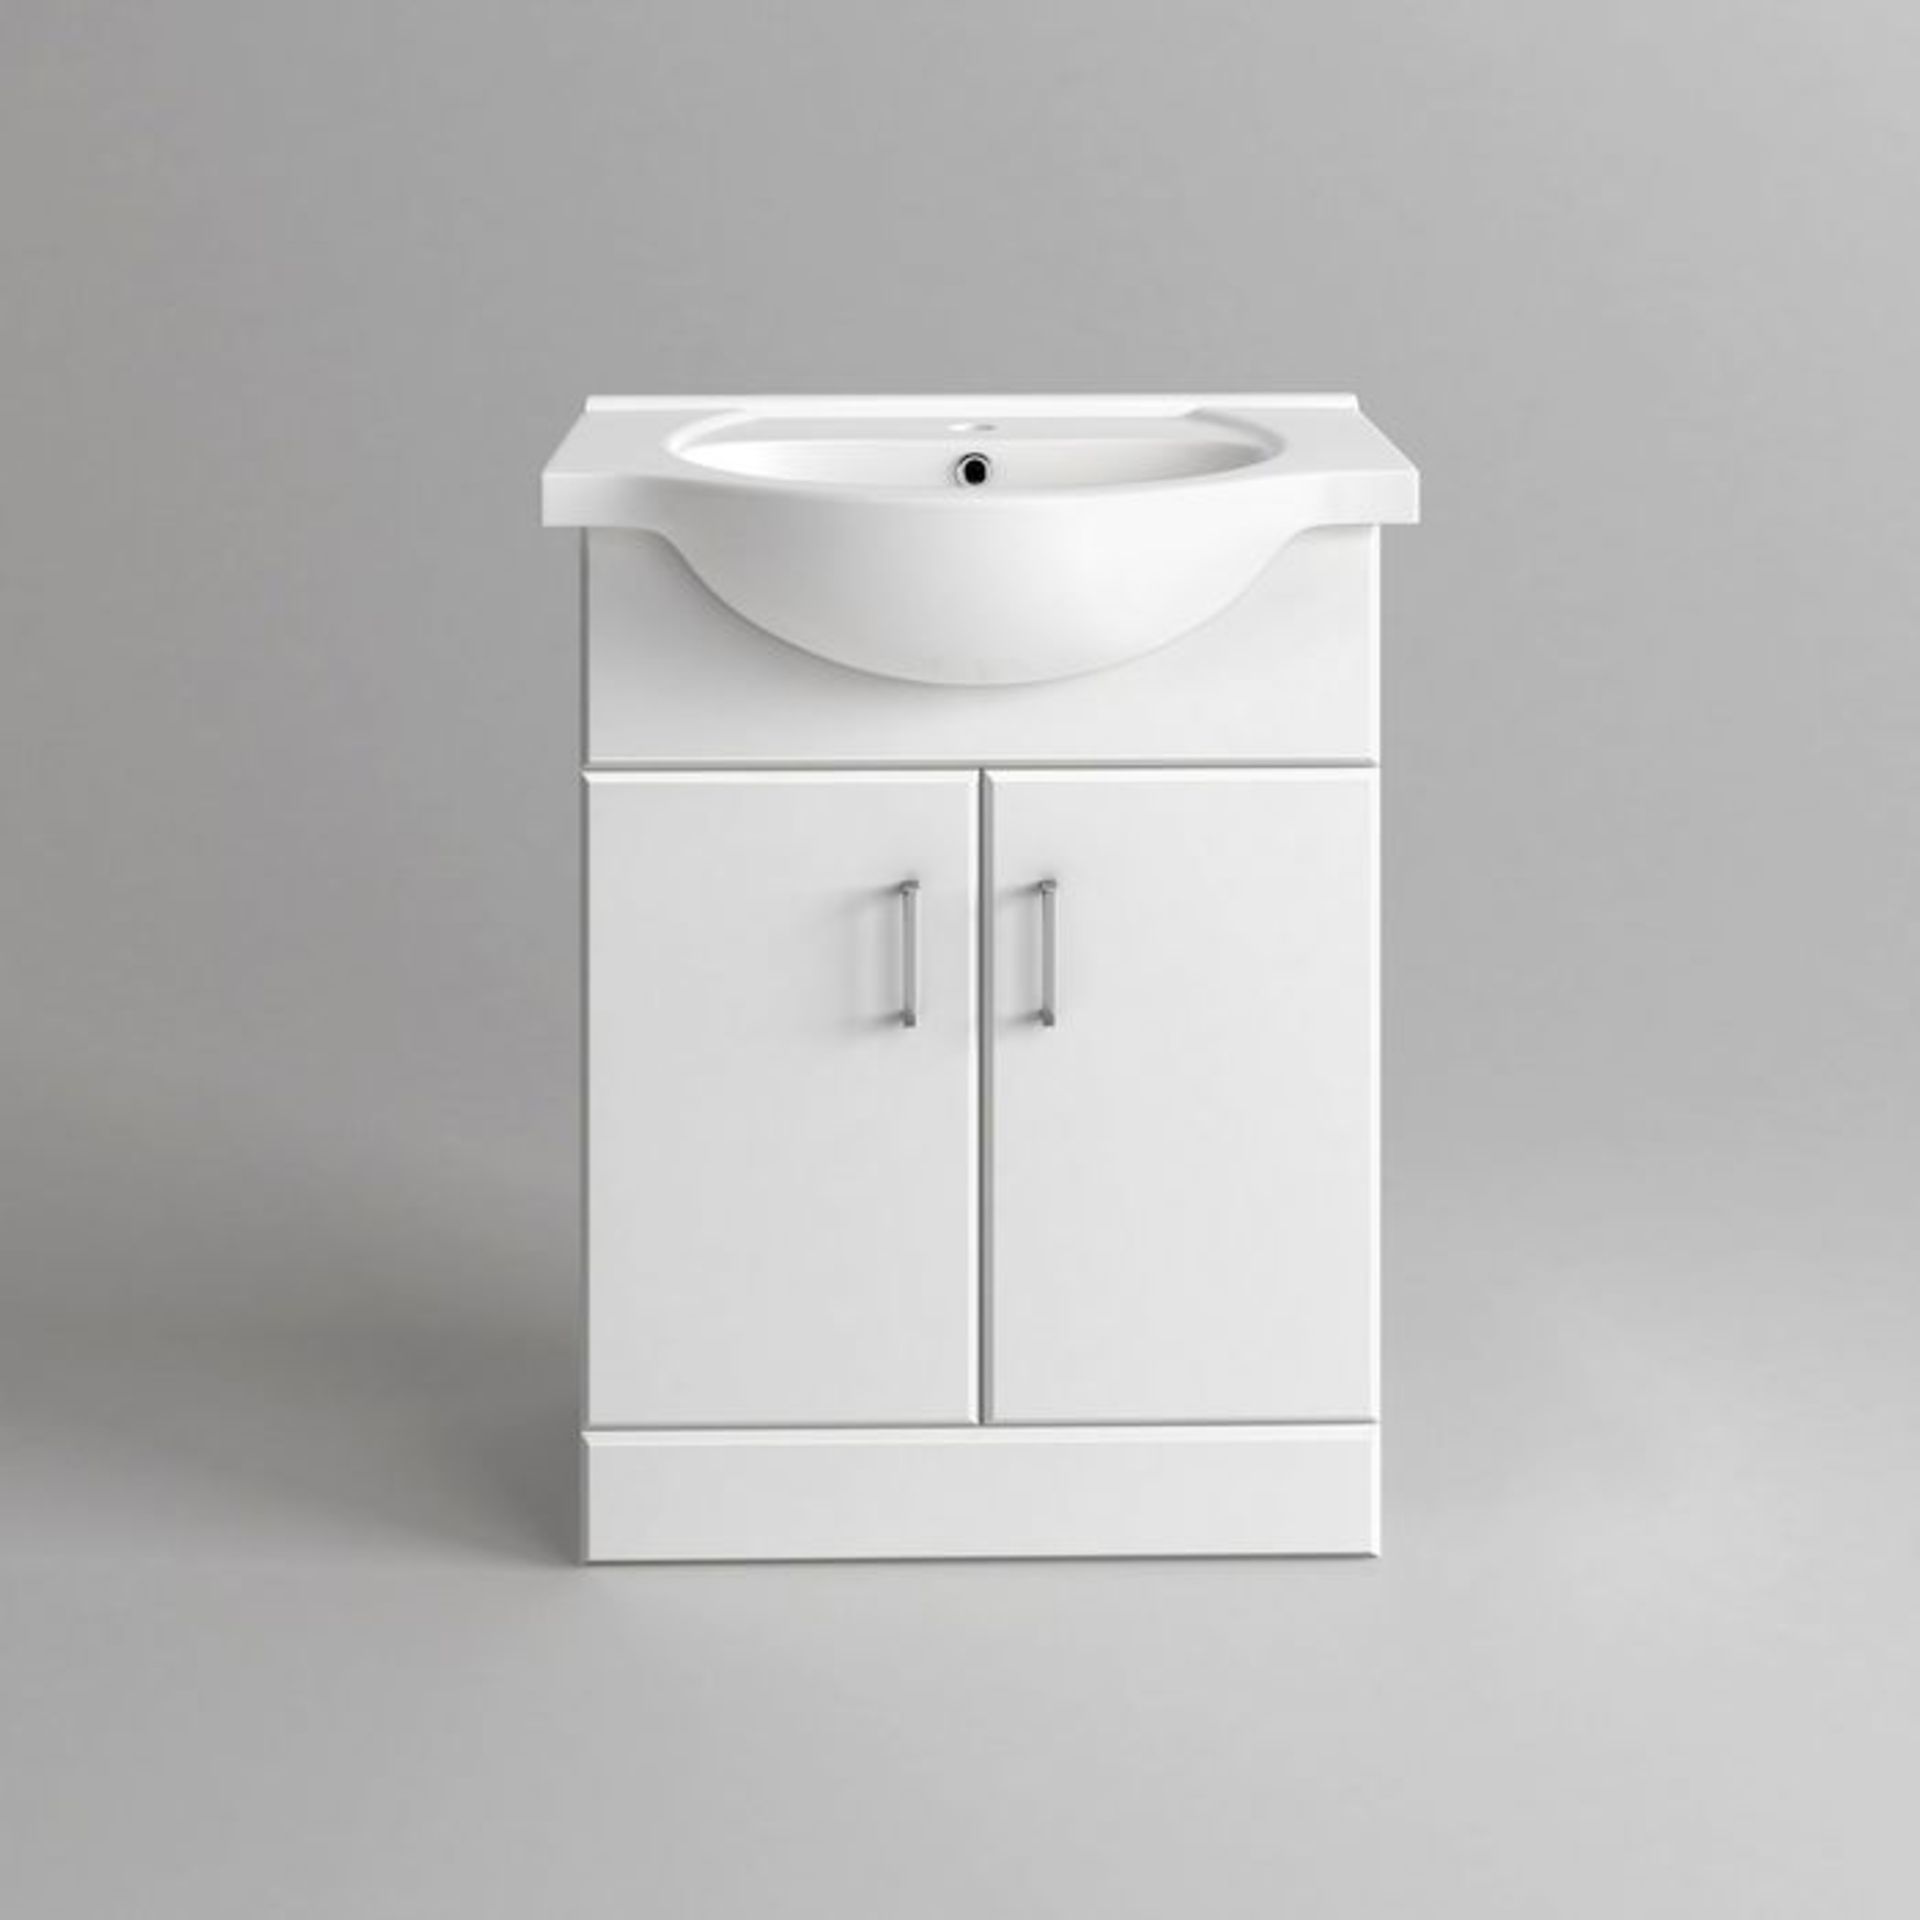 (Q93) 650x435mm Quartz Gloss White Built In Basin Cabinet. RRP £399.99. comes complete with basin. - Image 5 of 5